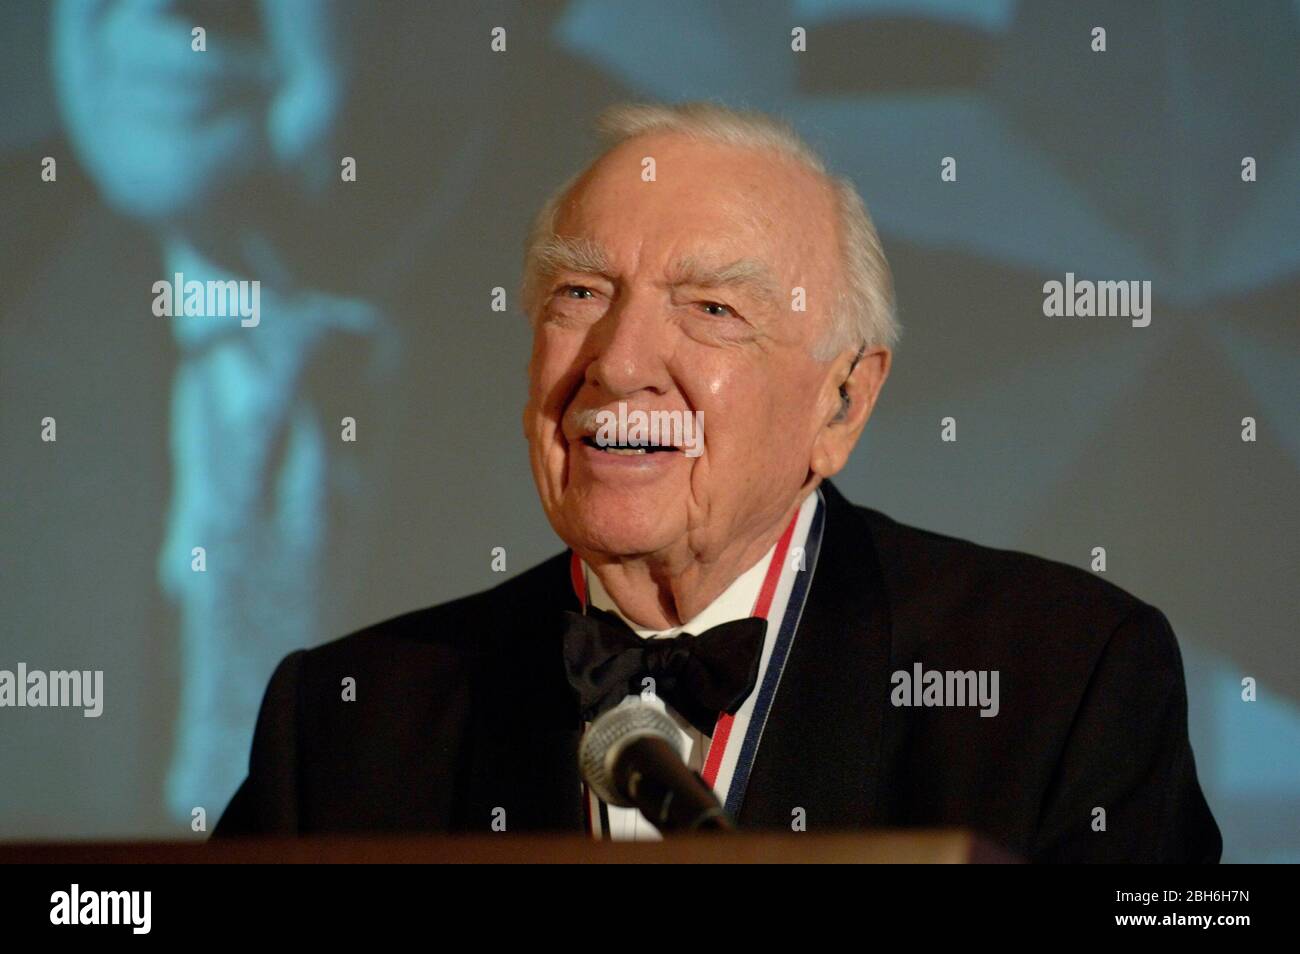 Austin, TX - March 1, 2006: Veteran newsman Walter Cronkite speaks at a ceremony honoring him as a 'History making Texan' awards at the Texas State History Museum.  Cronkite, who was educated and worked the early years of his journalism career in Texas, died July 17th, 2009  at 92 years of age.    ©Bob Daemmrich Stock Photo